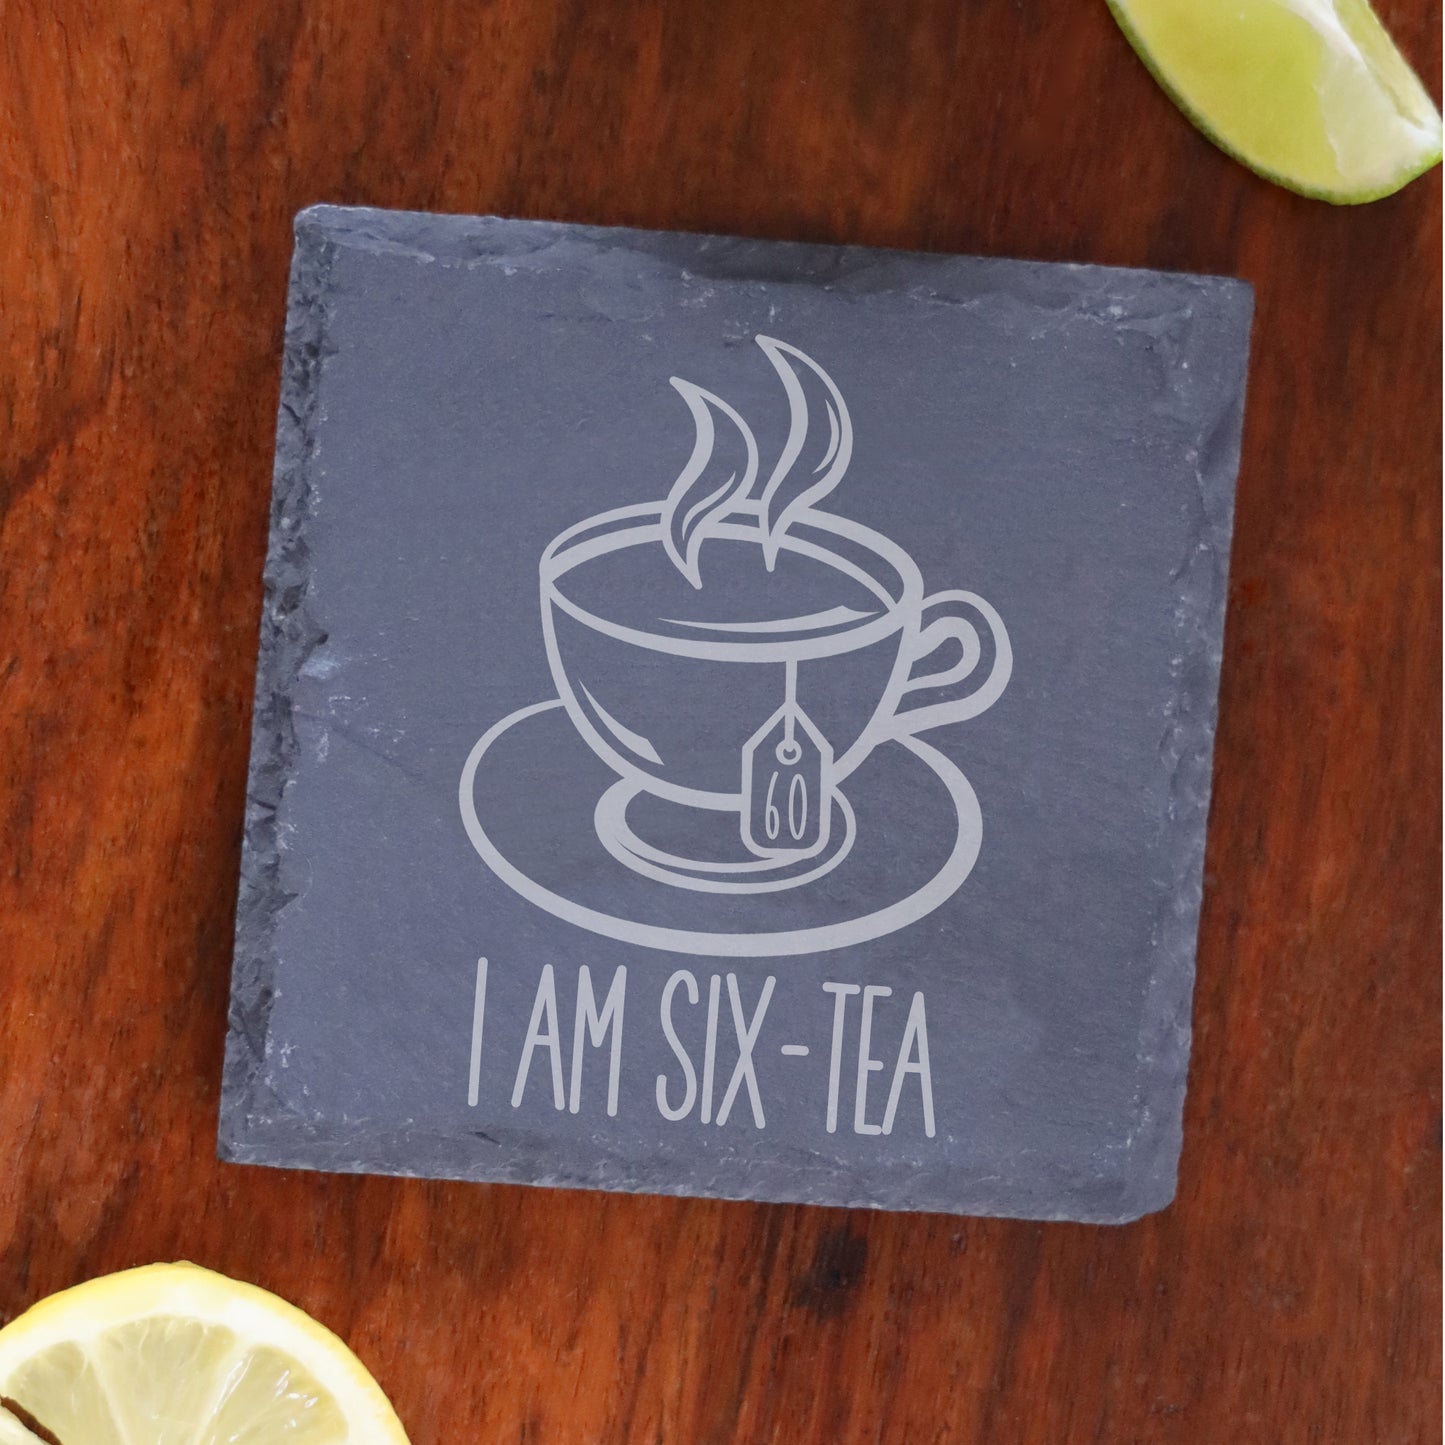 I Am Six-Tea Funny 60th Birthday Mug Gift for Tea Lovers  - Always Looking Good - Square Slate Coaster Only  